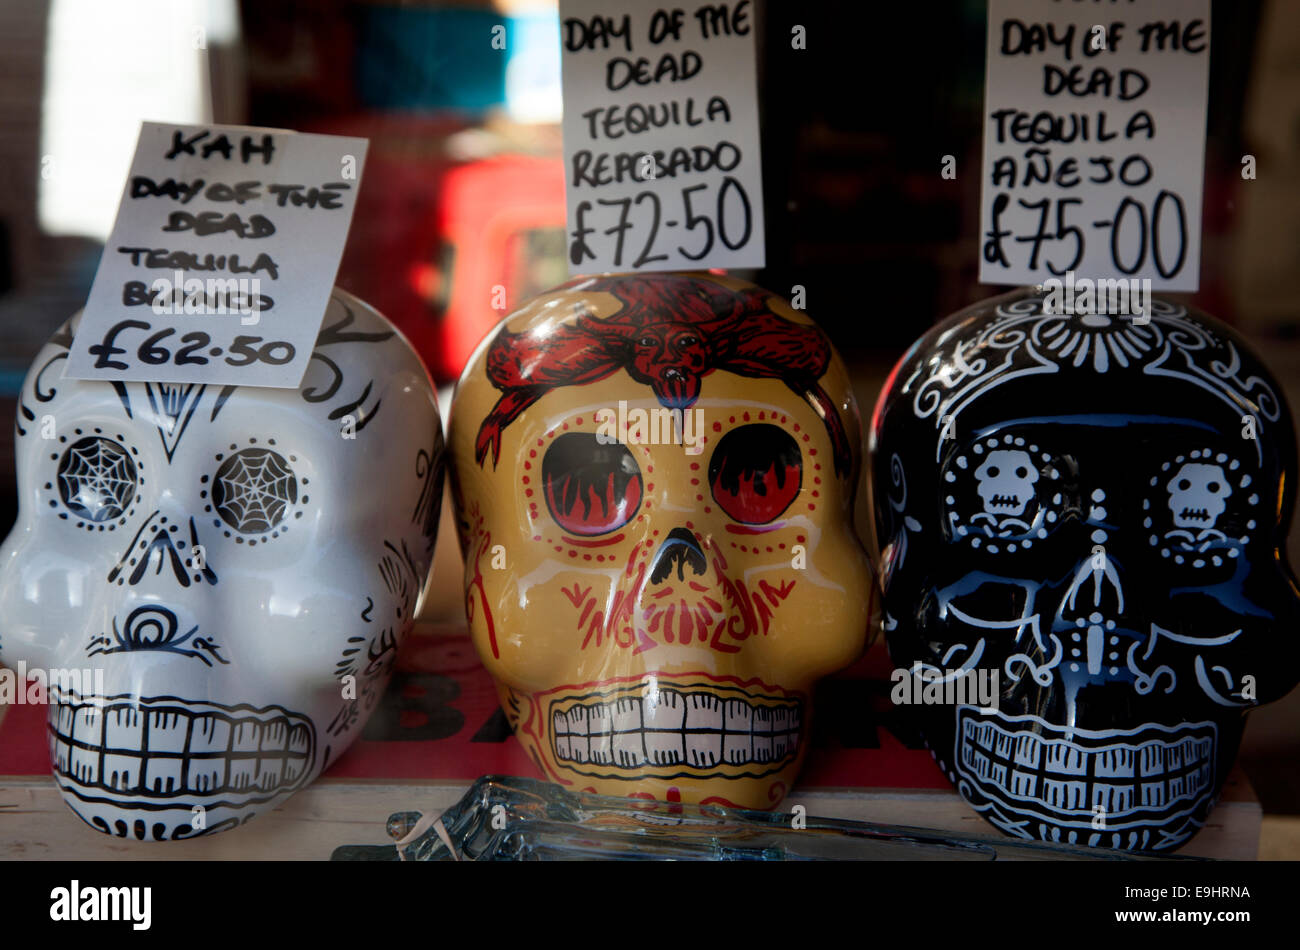 Kah 'Day of the Dead' tequila in London shop window display Stock Photo